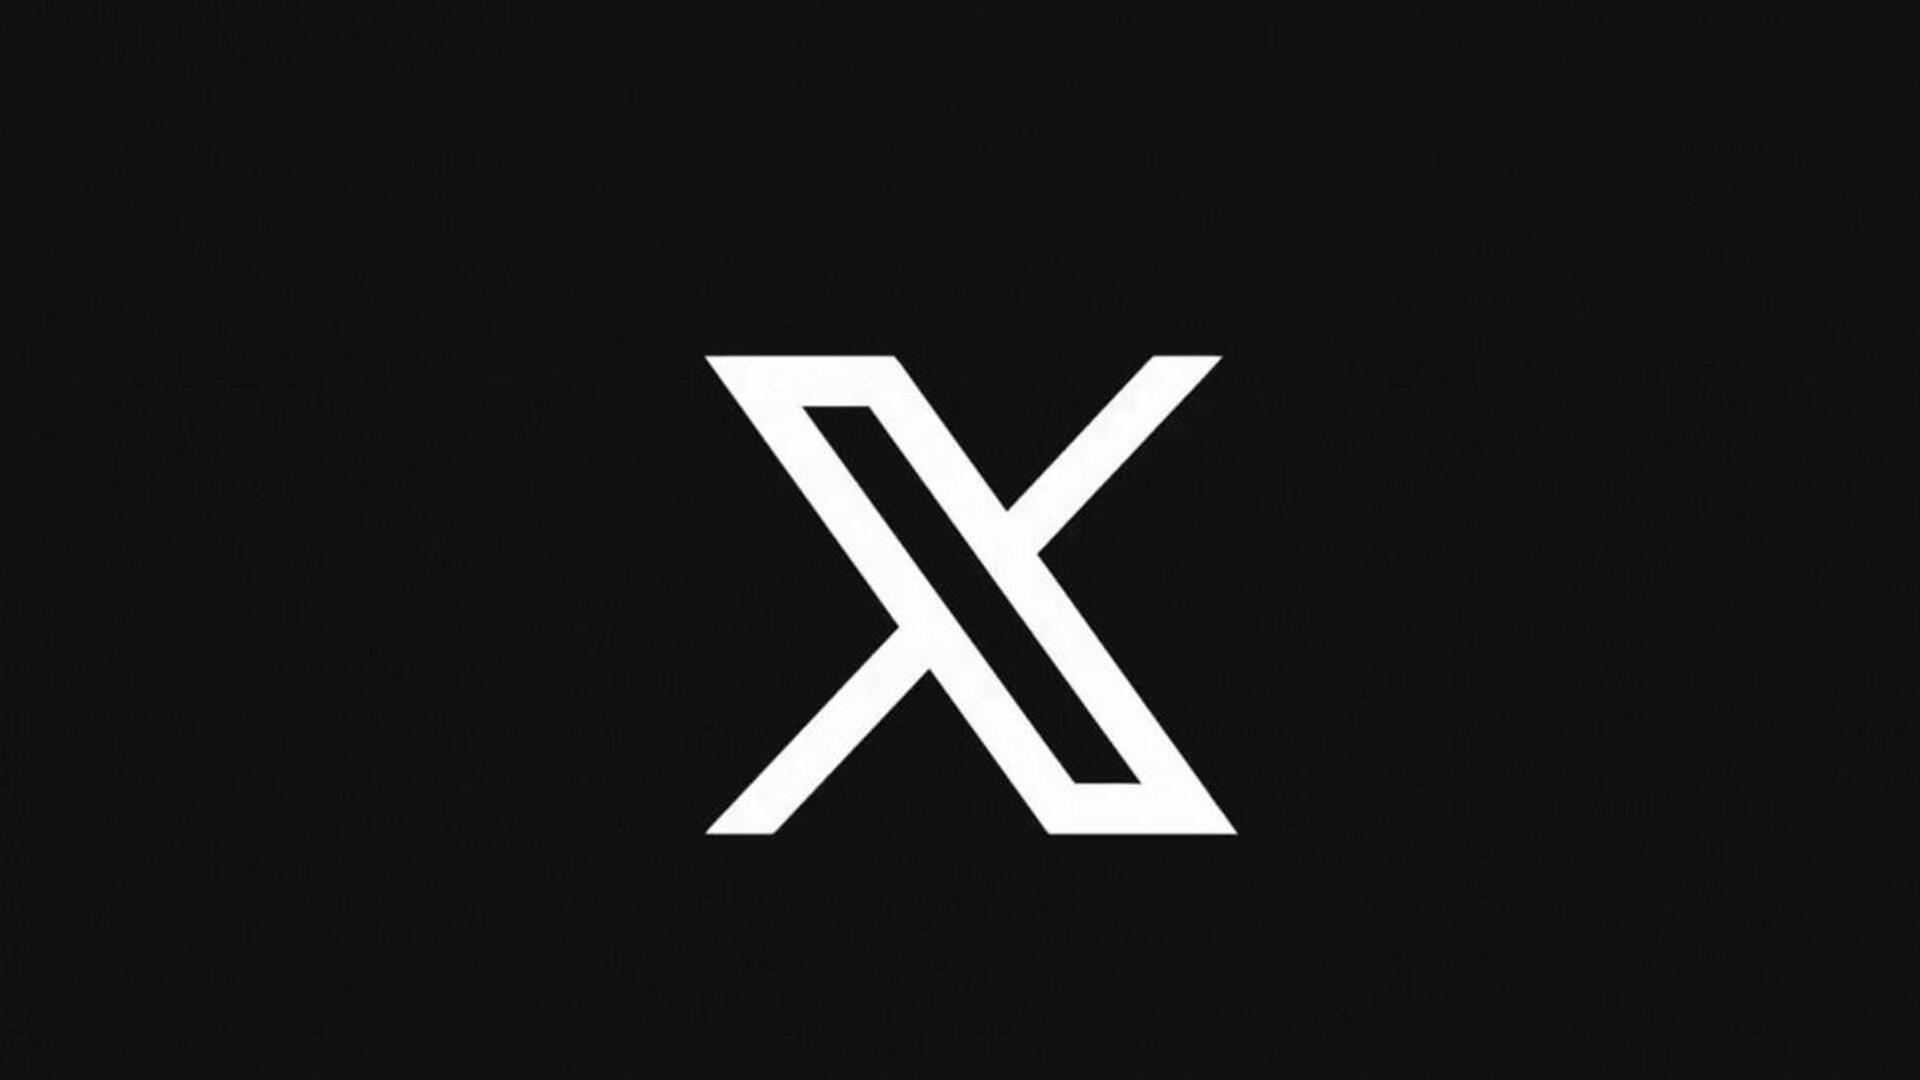 X starts charging new users $1/year in New Zealand, Philippines